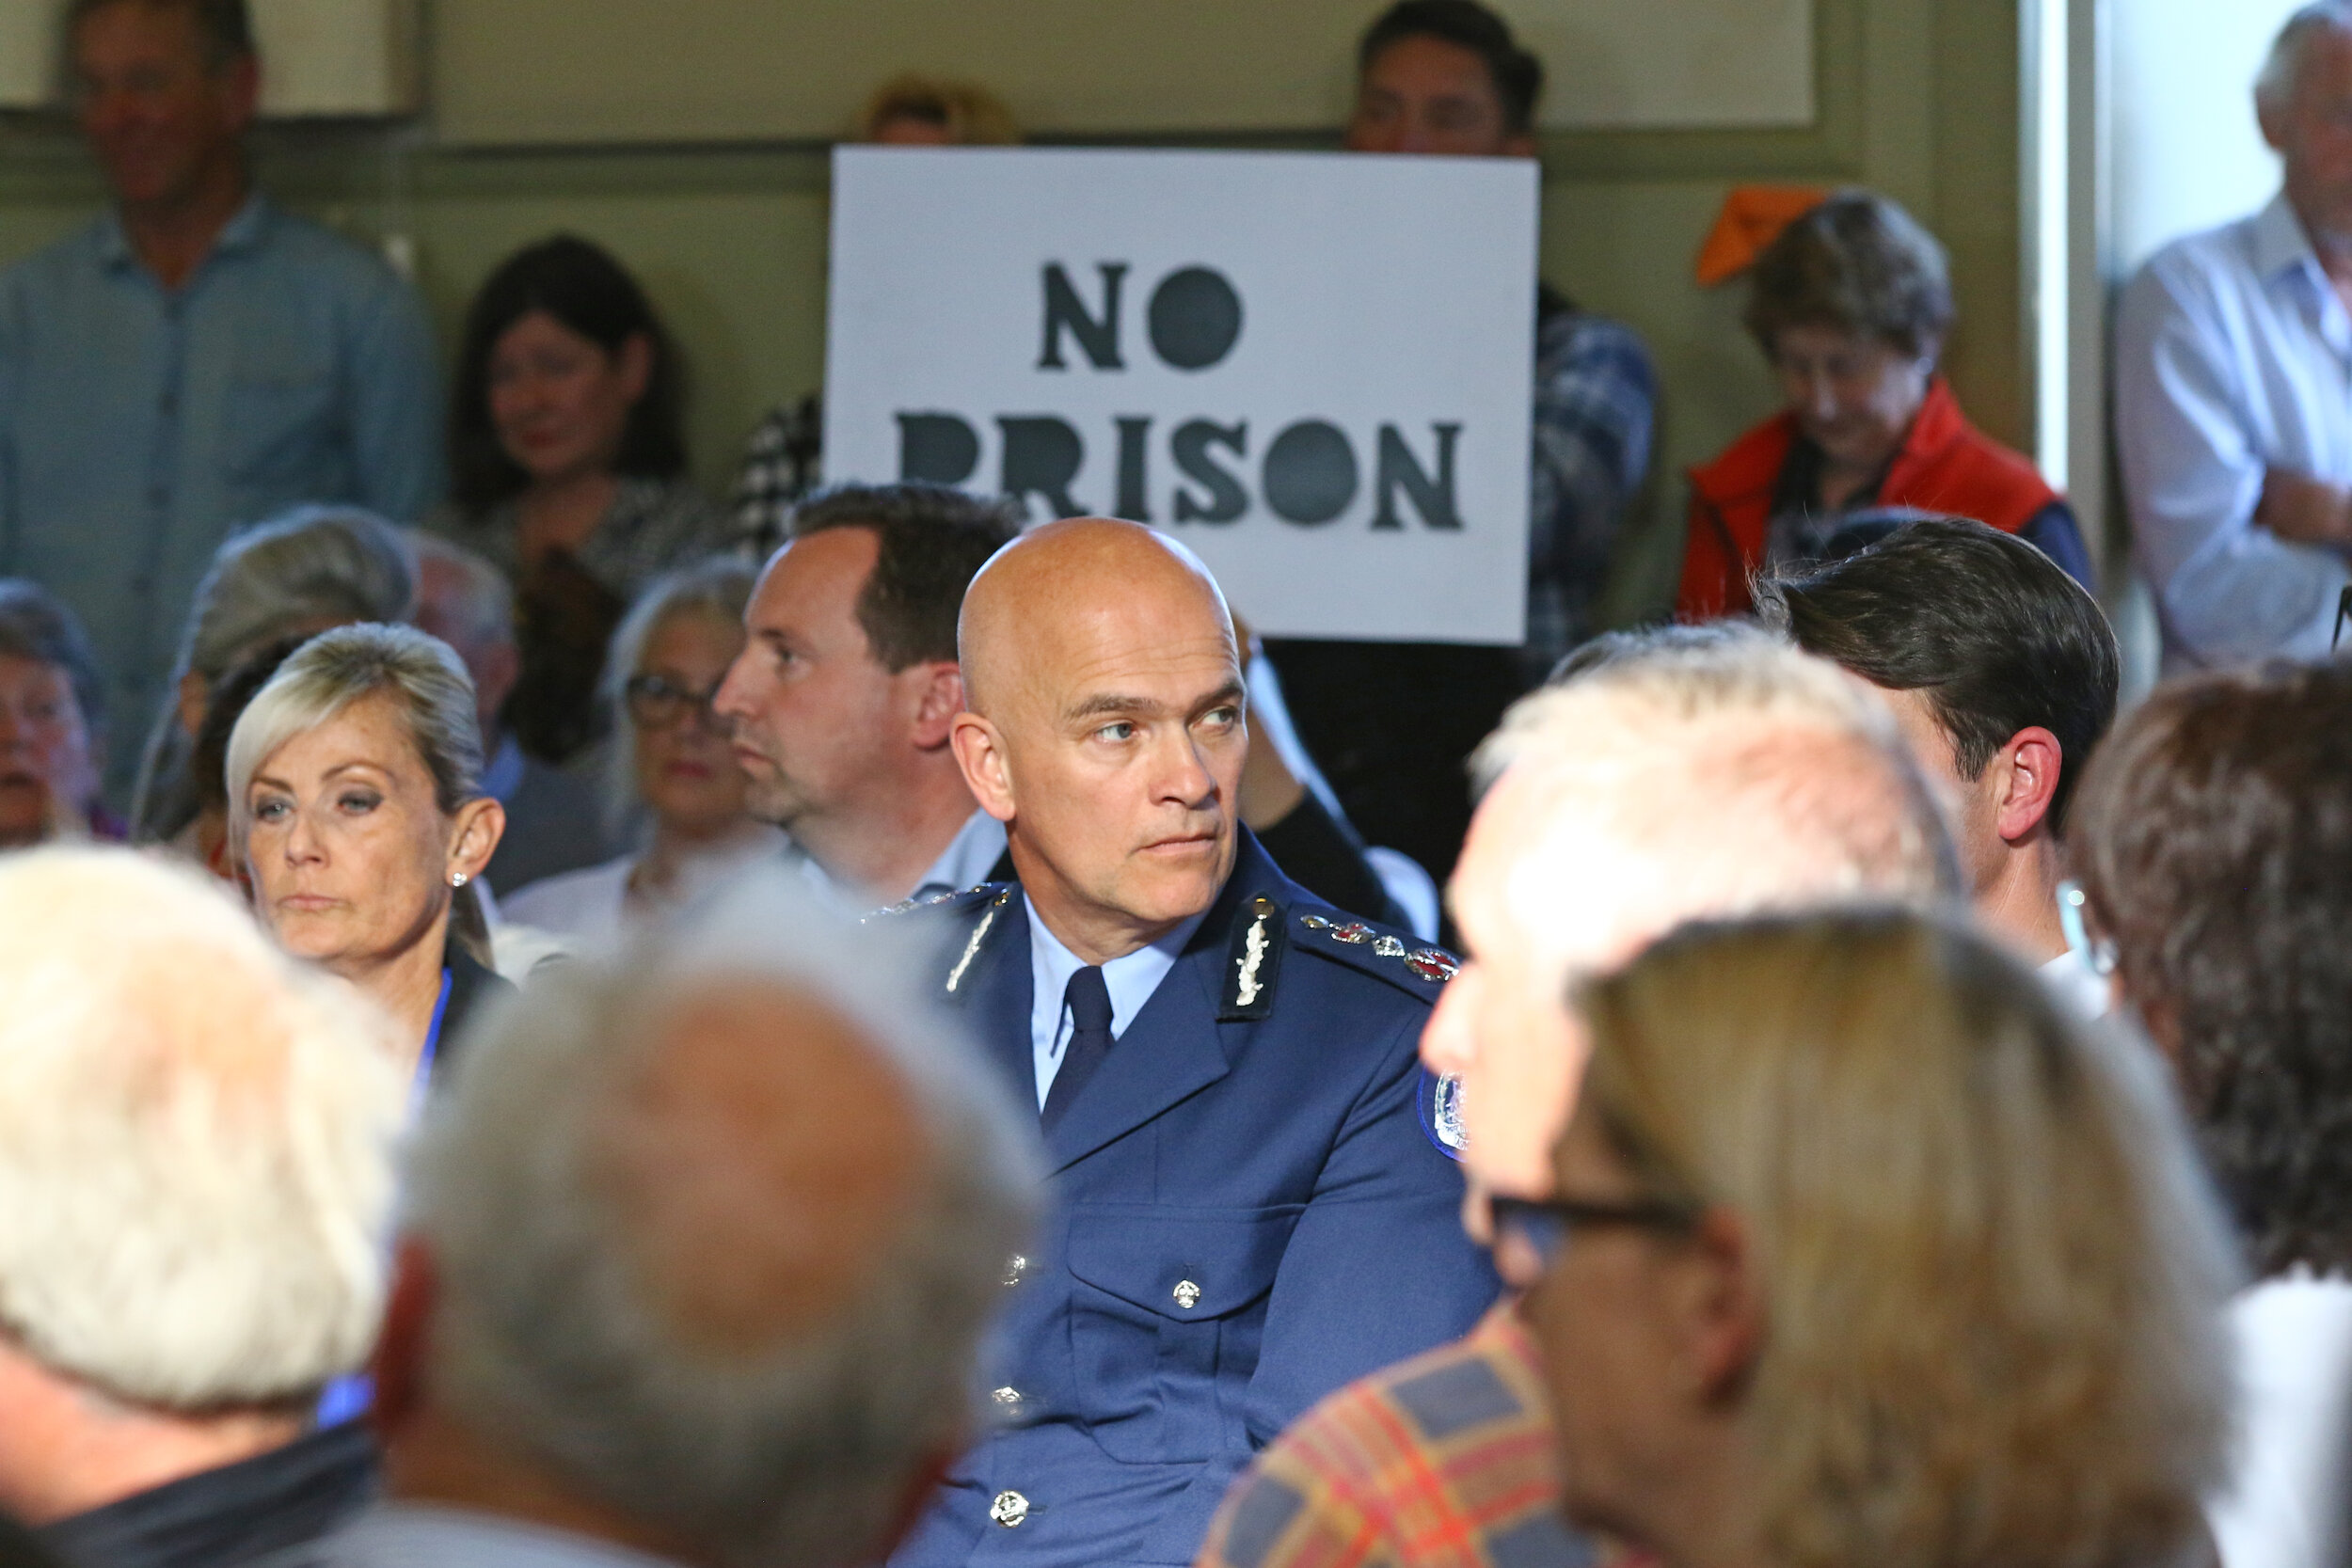 Opinion Prison public meeting results in stalemate